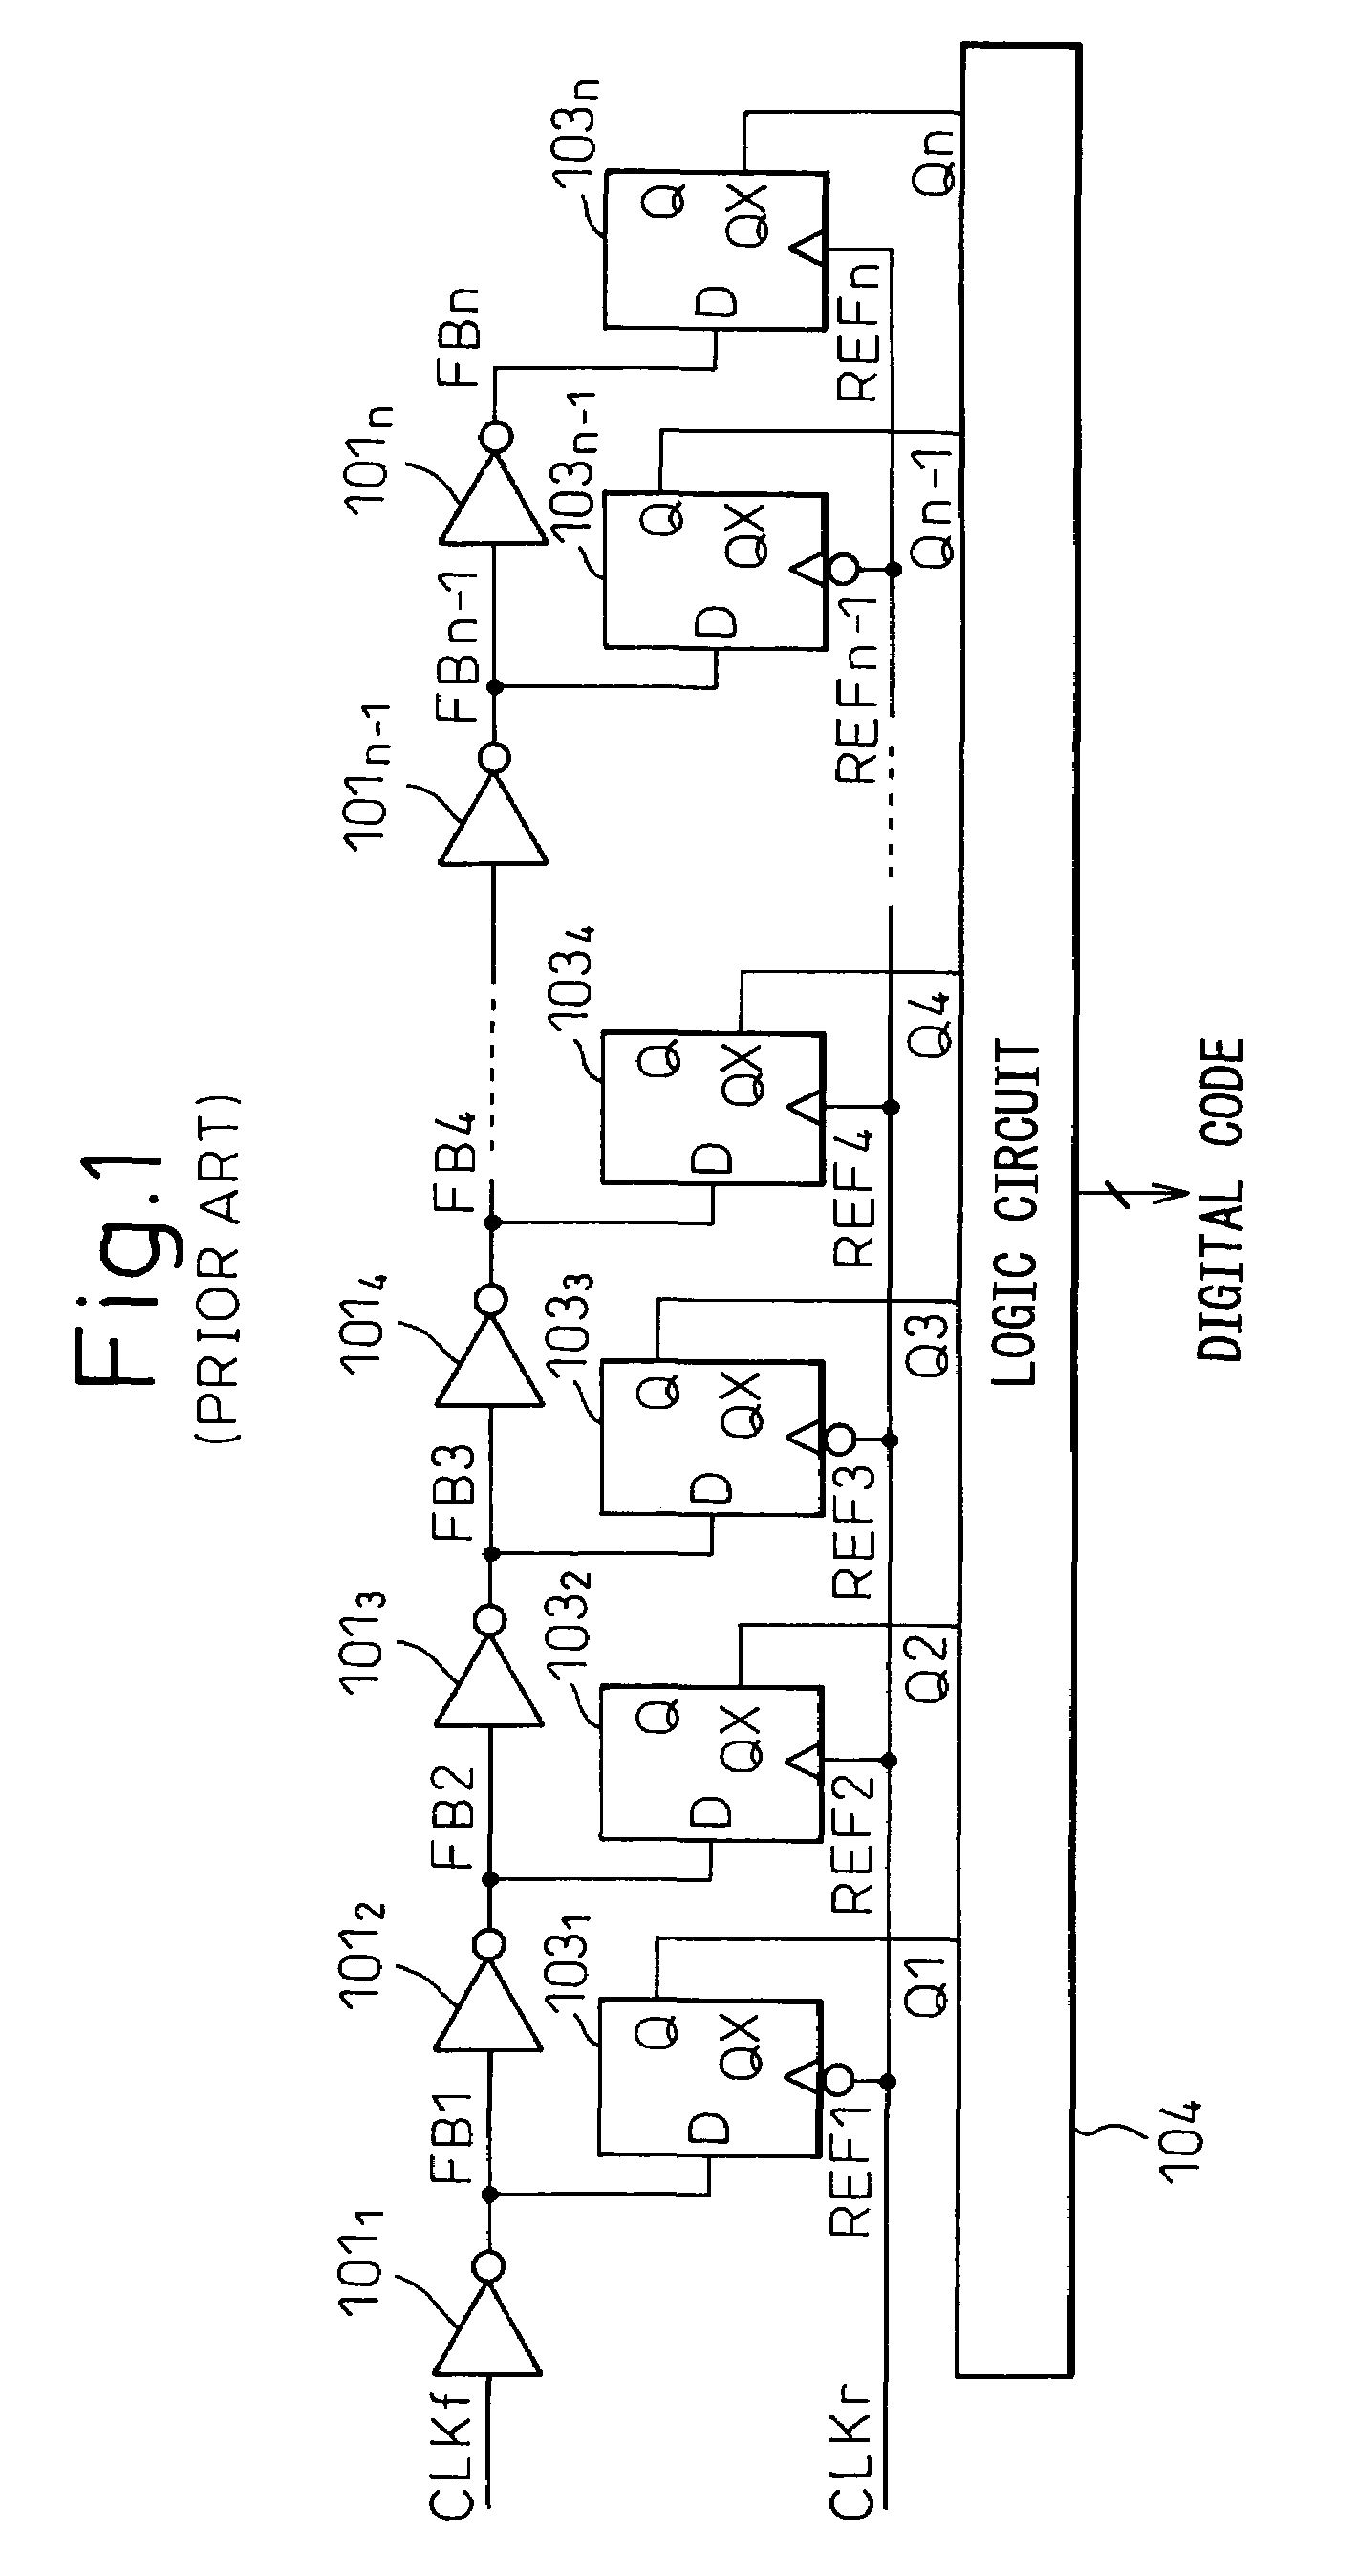 Digital phase detector improving phase detection resolution thereof